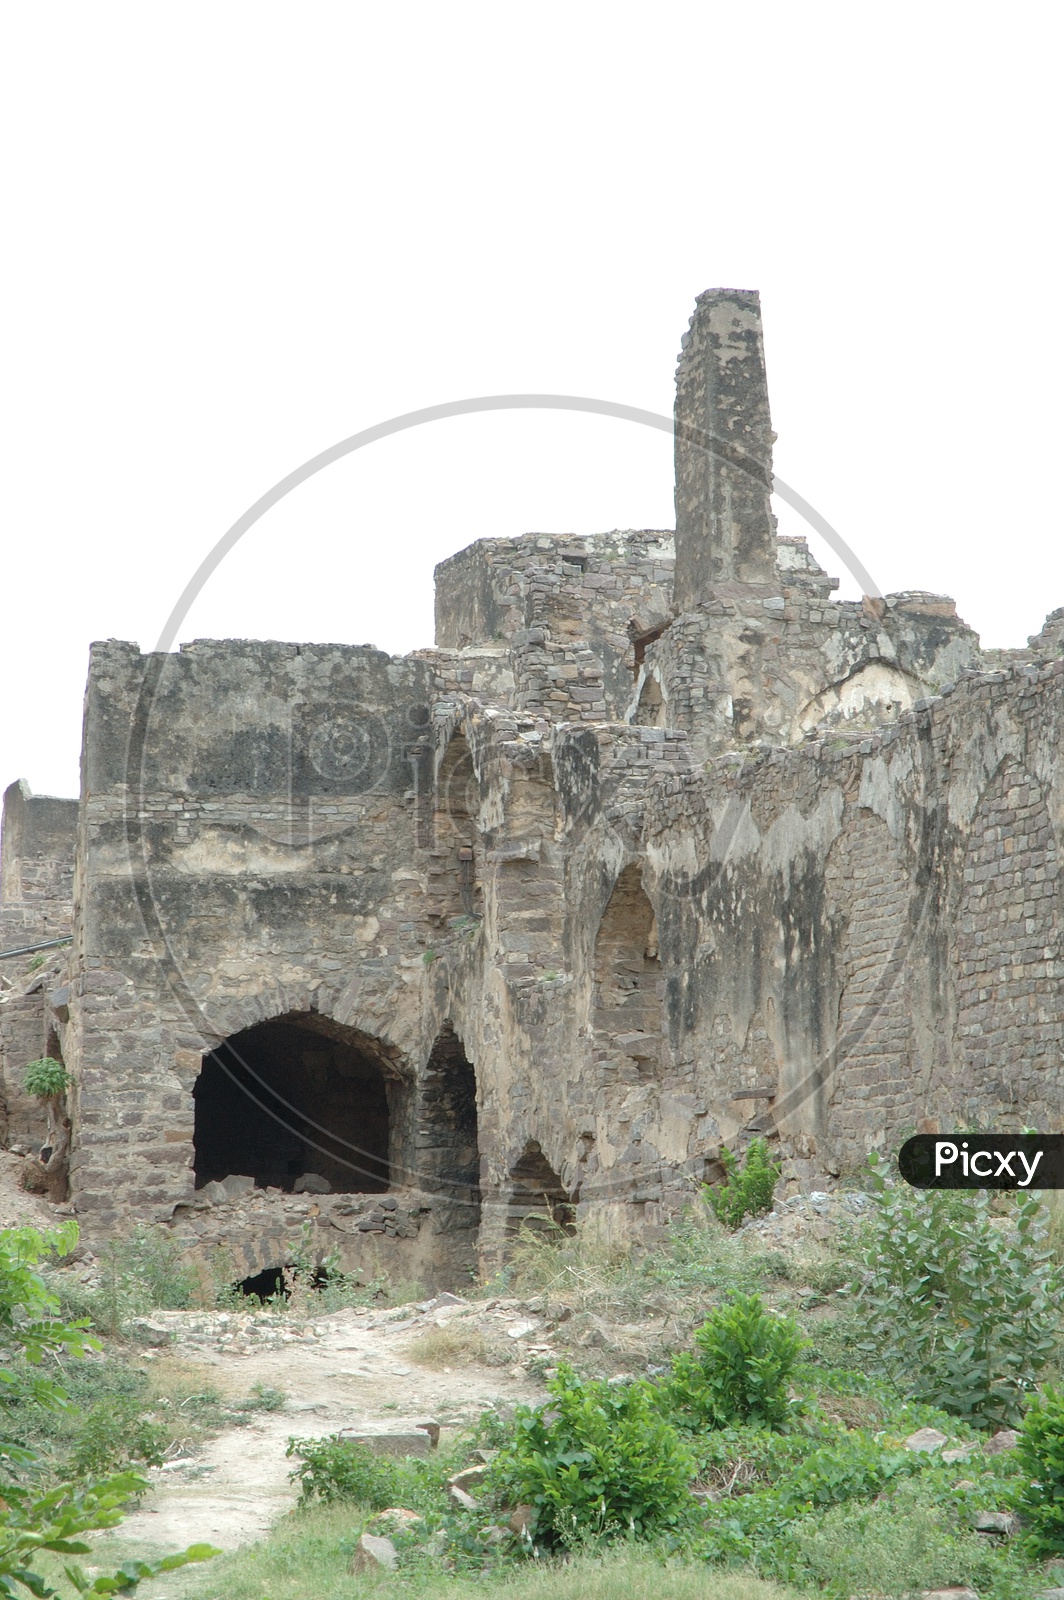 Historic Architecture of Golconda Fort in Hyderabad